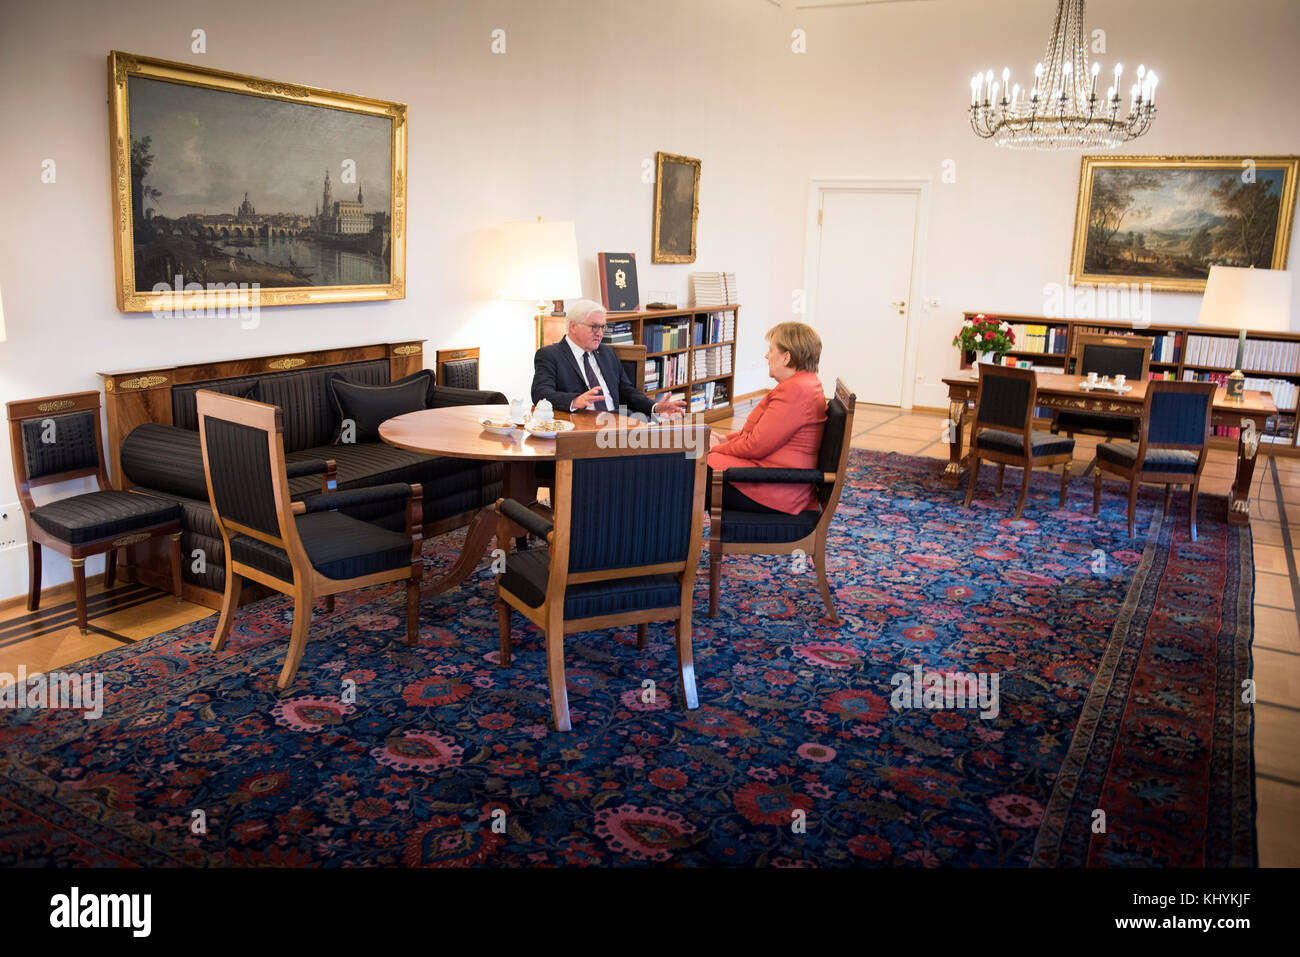 Berlin, Germany. 20th Nov, 2017. HANDOUT - Chancellor Angela Merkel and President Frank-Walter Steinmeier of Germany converse at the begin of their meeting at Bellevue castle in Berlin, Germany, 20 November 2017. Previously, Chancellor Merkel informed the President about the situation after the failed exploratory talks.(ATTENTION EDITORS: FOR EDITORIAL USE ONLY IN CONNECTION WITH CURRENT REPORTING; MANDATORY CREDIT) Credit: Guido Bergmann/Bundesregierung-Pool/dpa/Alamy Live News Stock Photo